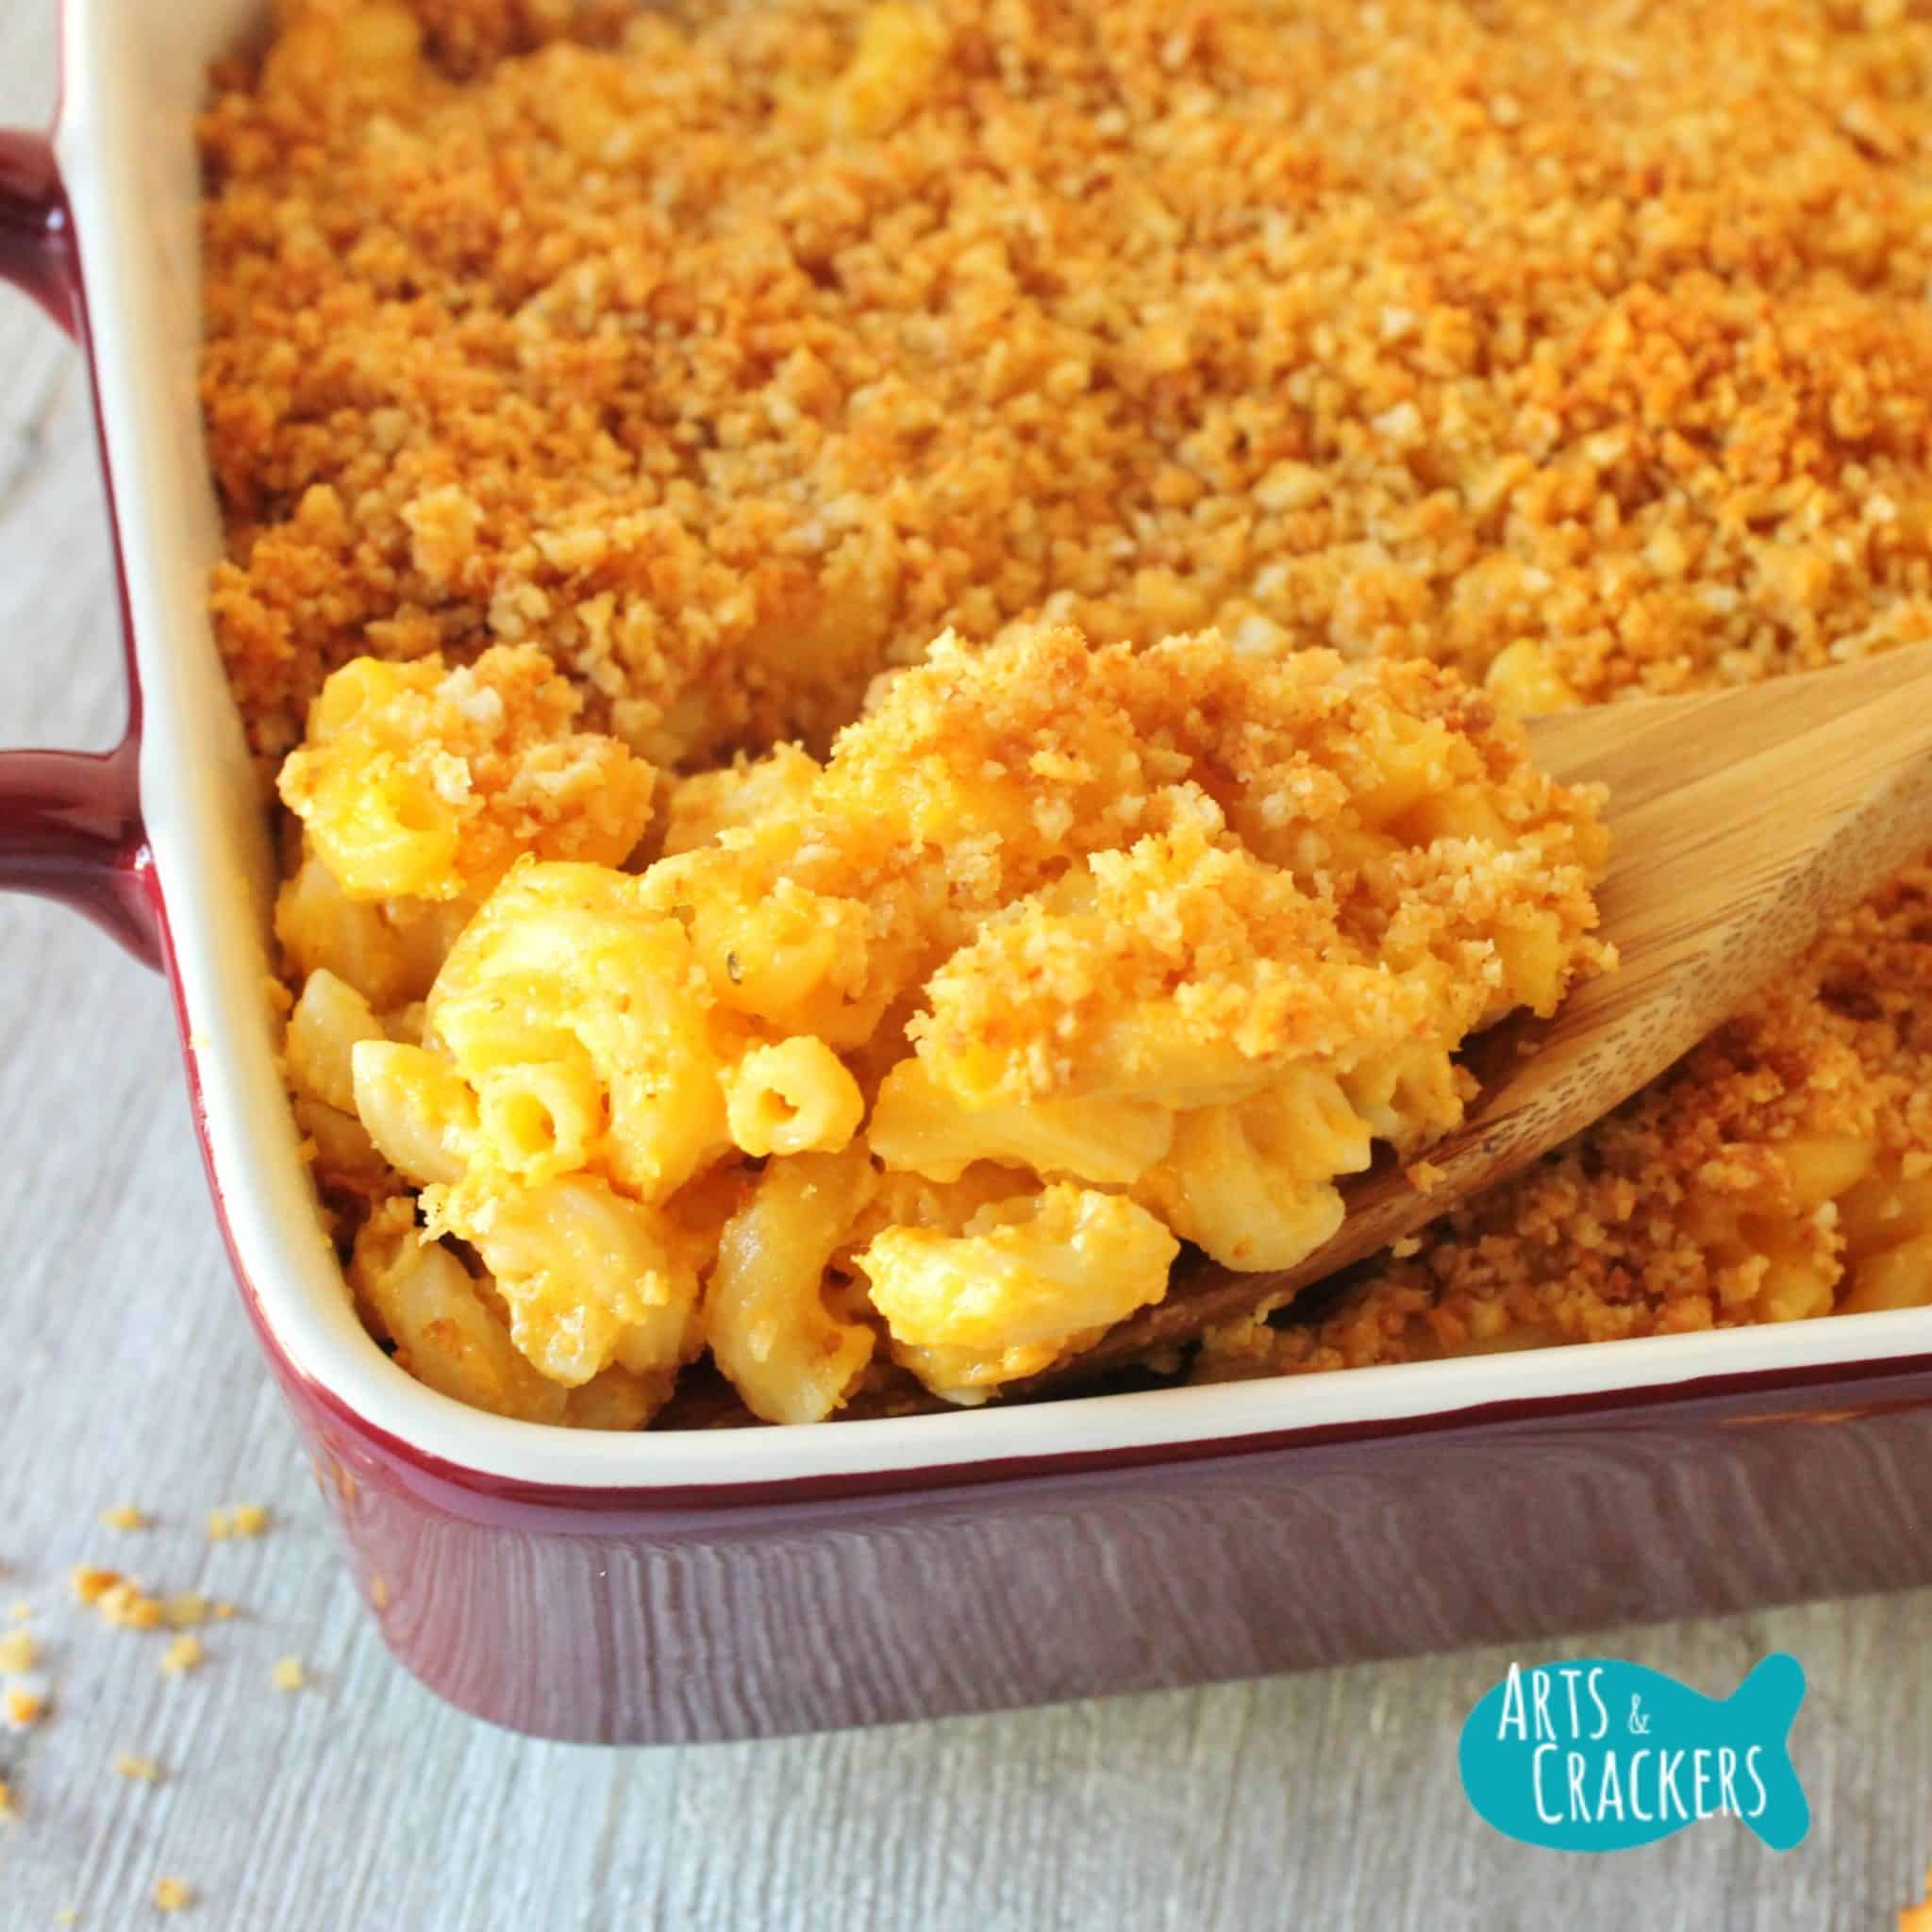 Baked Macaroni and Cheese with Cheesy Crumb Topping Recipe